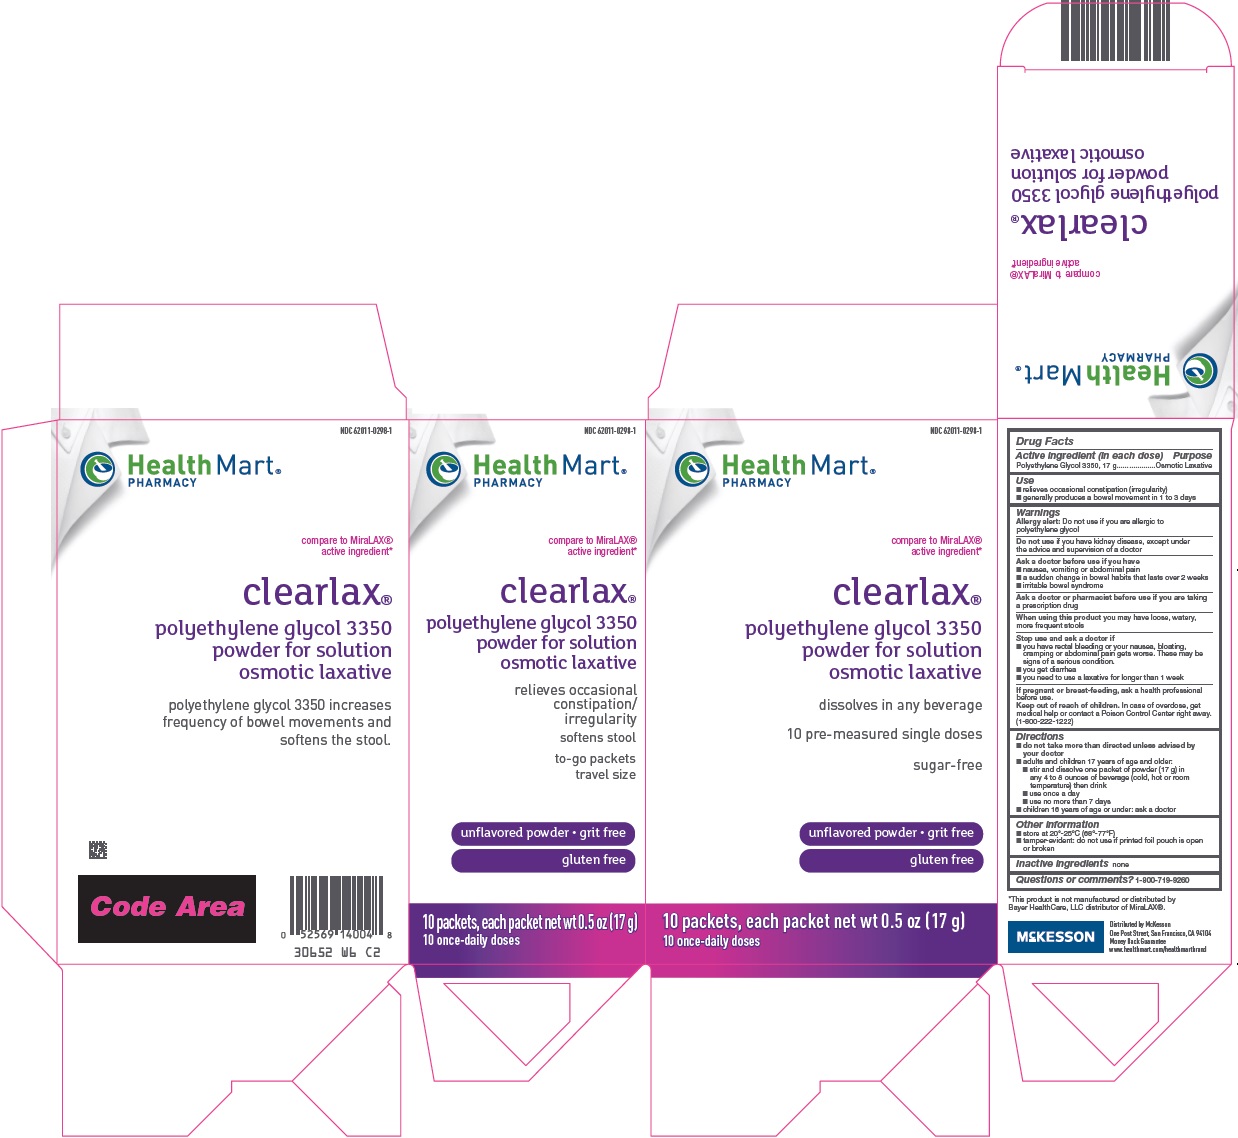 HealthMart Clearlax image